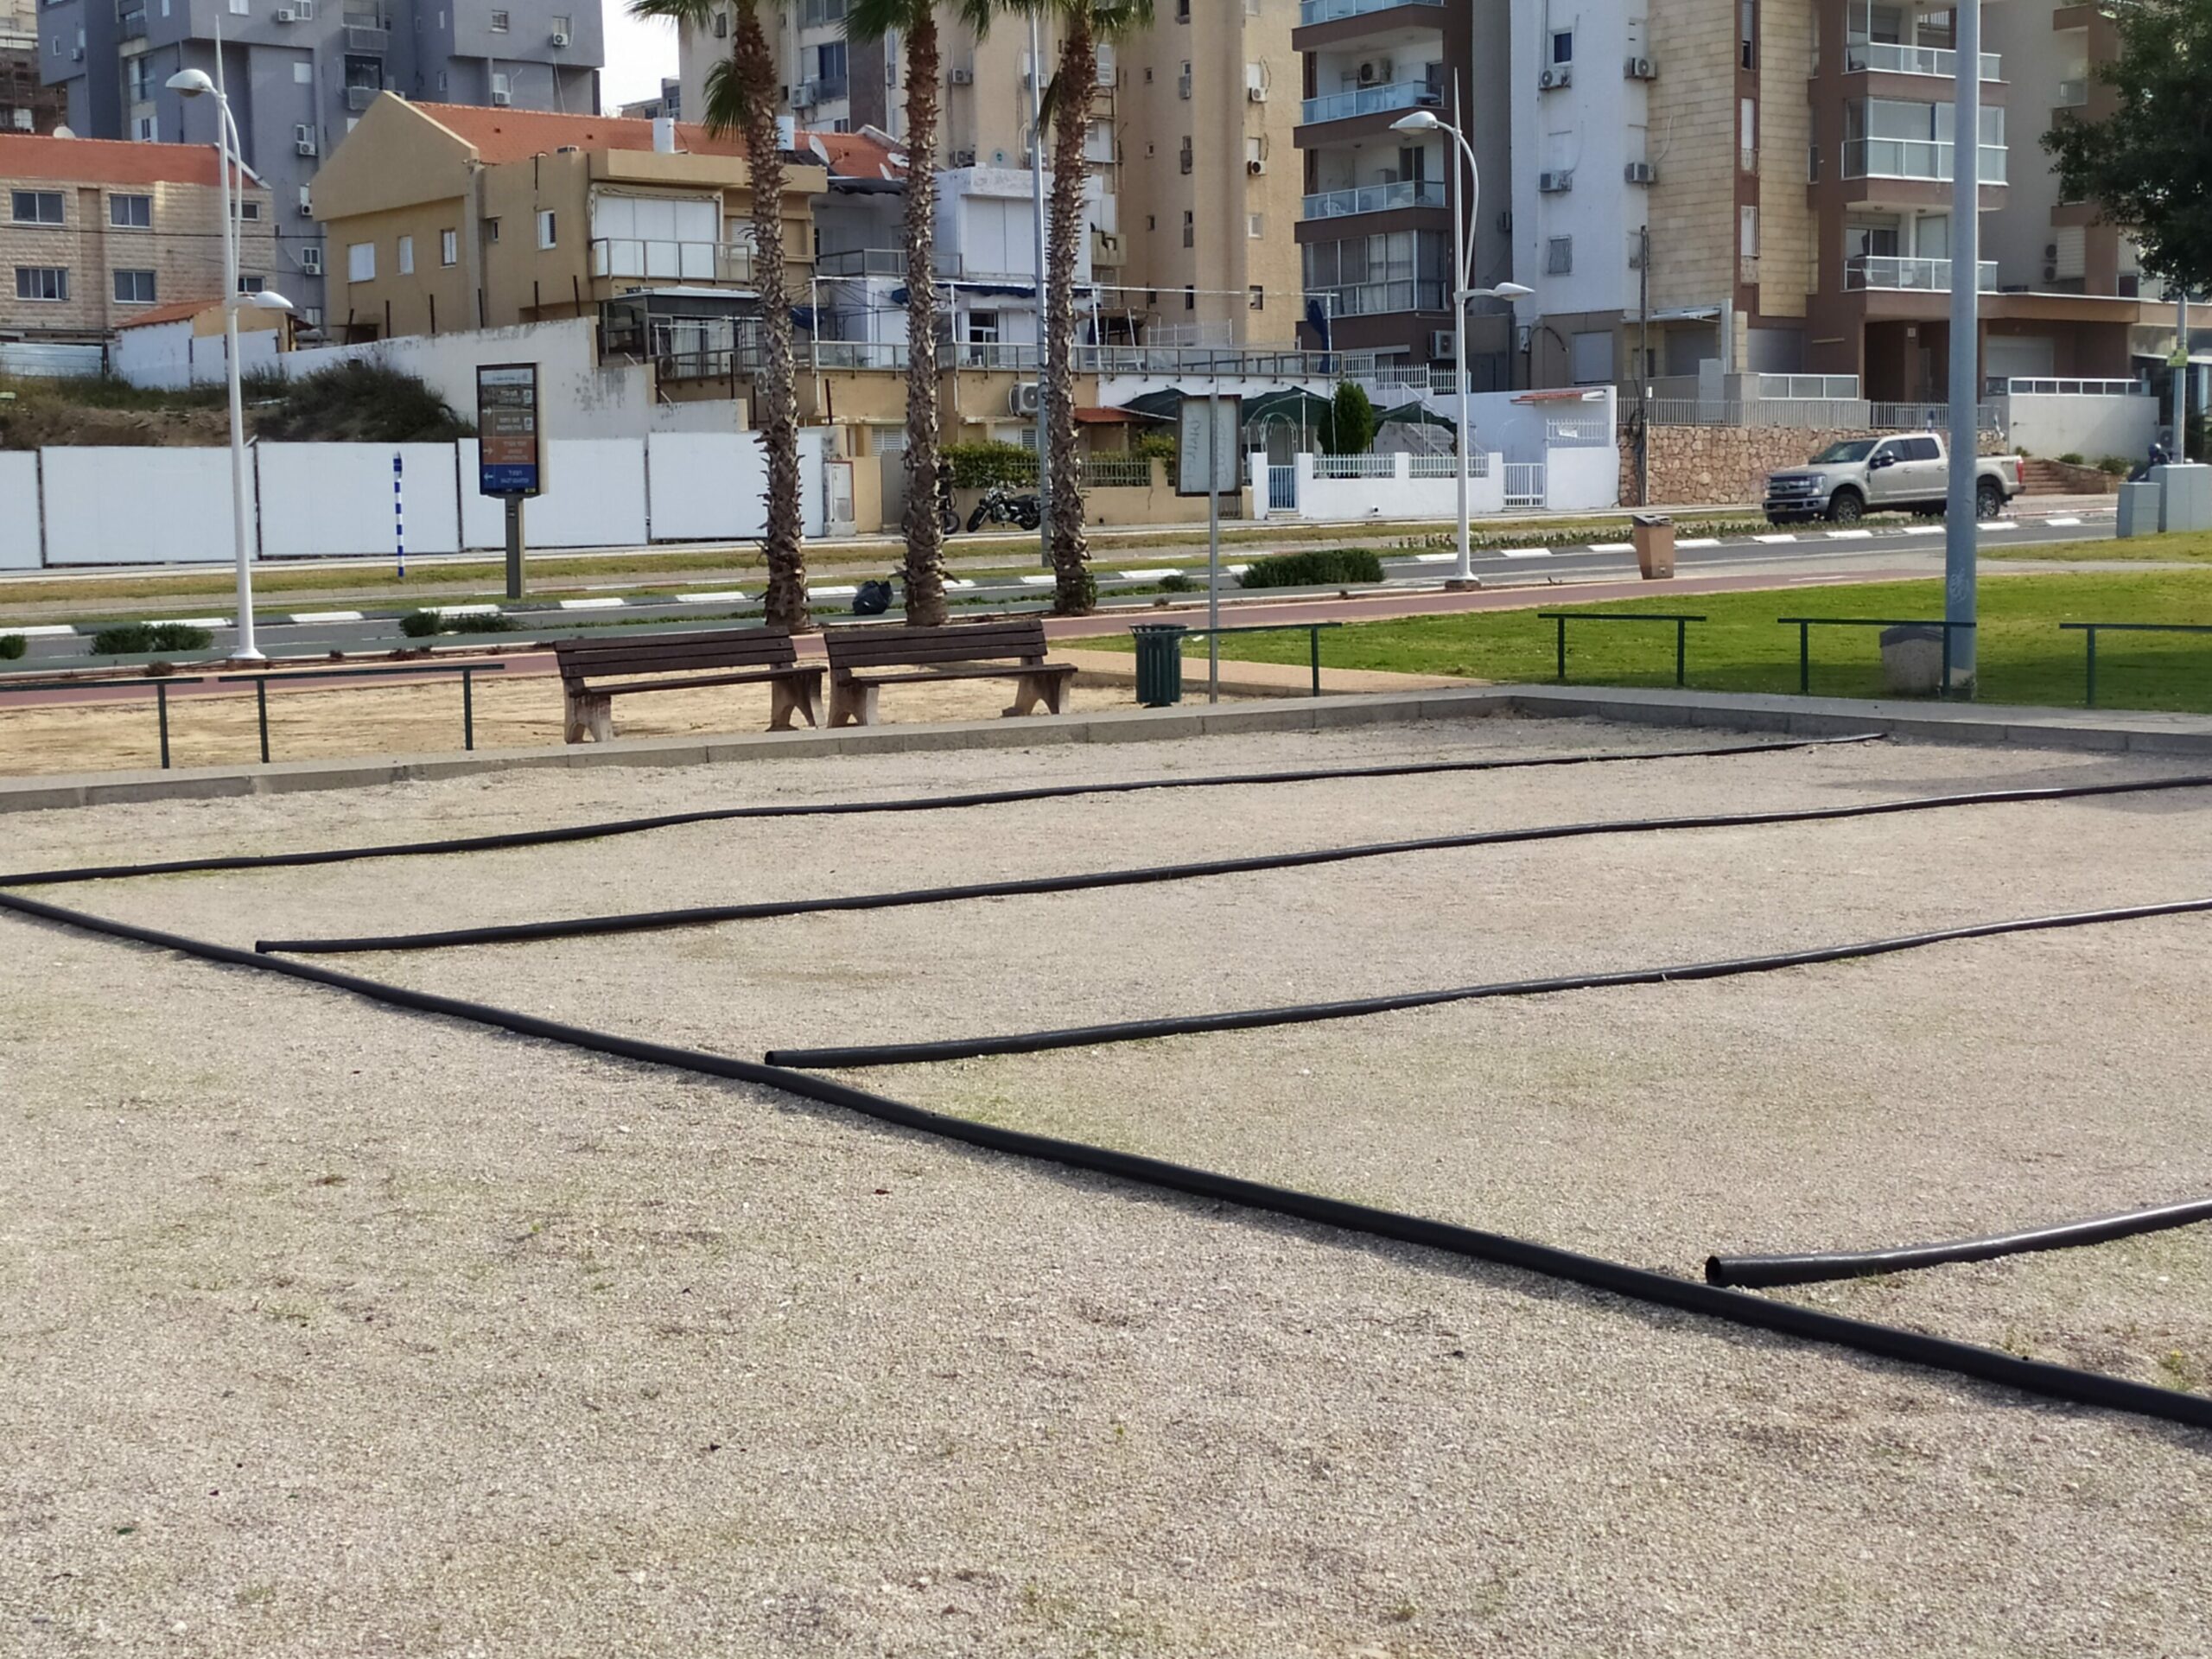 Five petanque courts for different teams with boundary lines